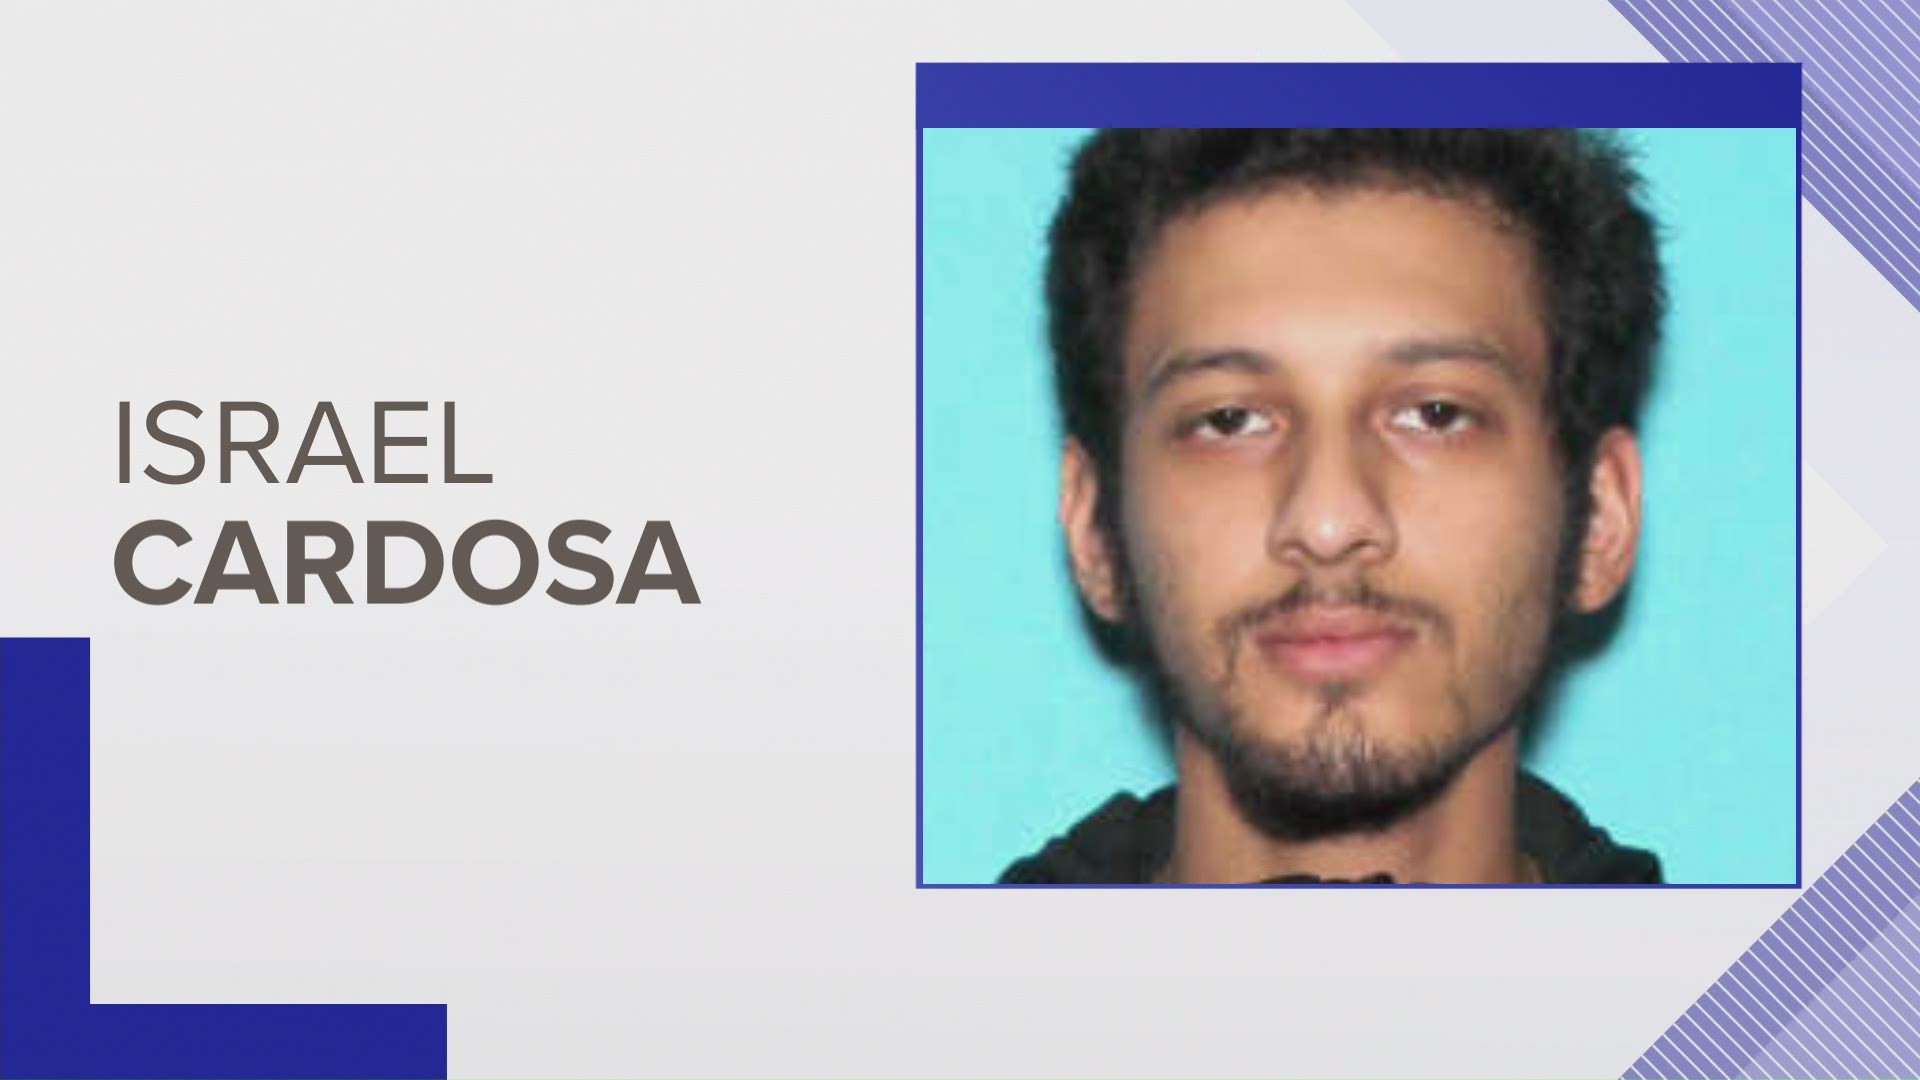 Ramiro Cardosa was allegedly involved in the 2020 shooting death of a 17-year-old boy.